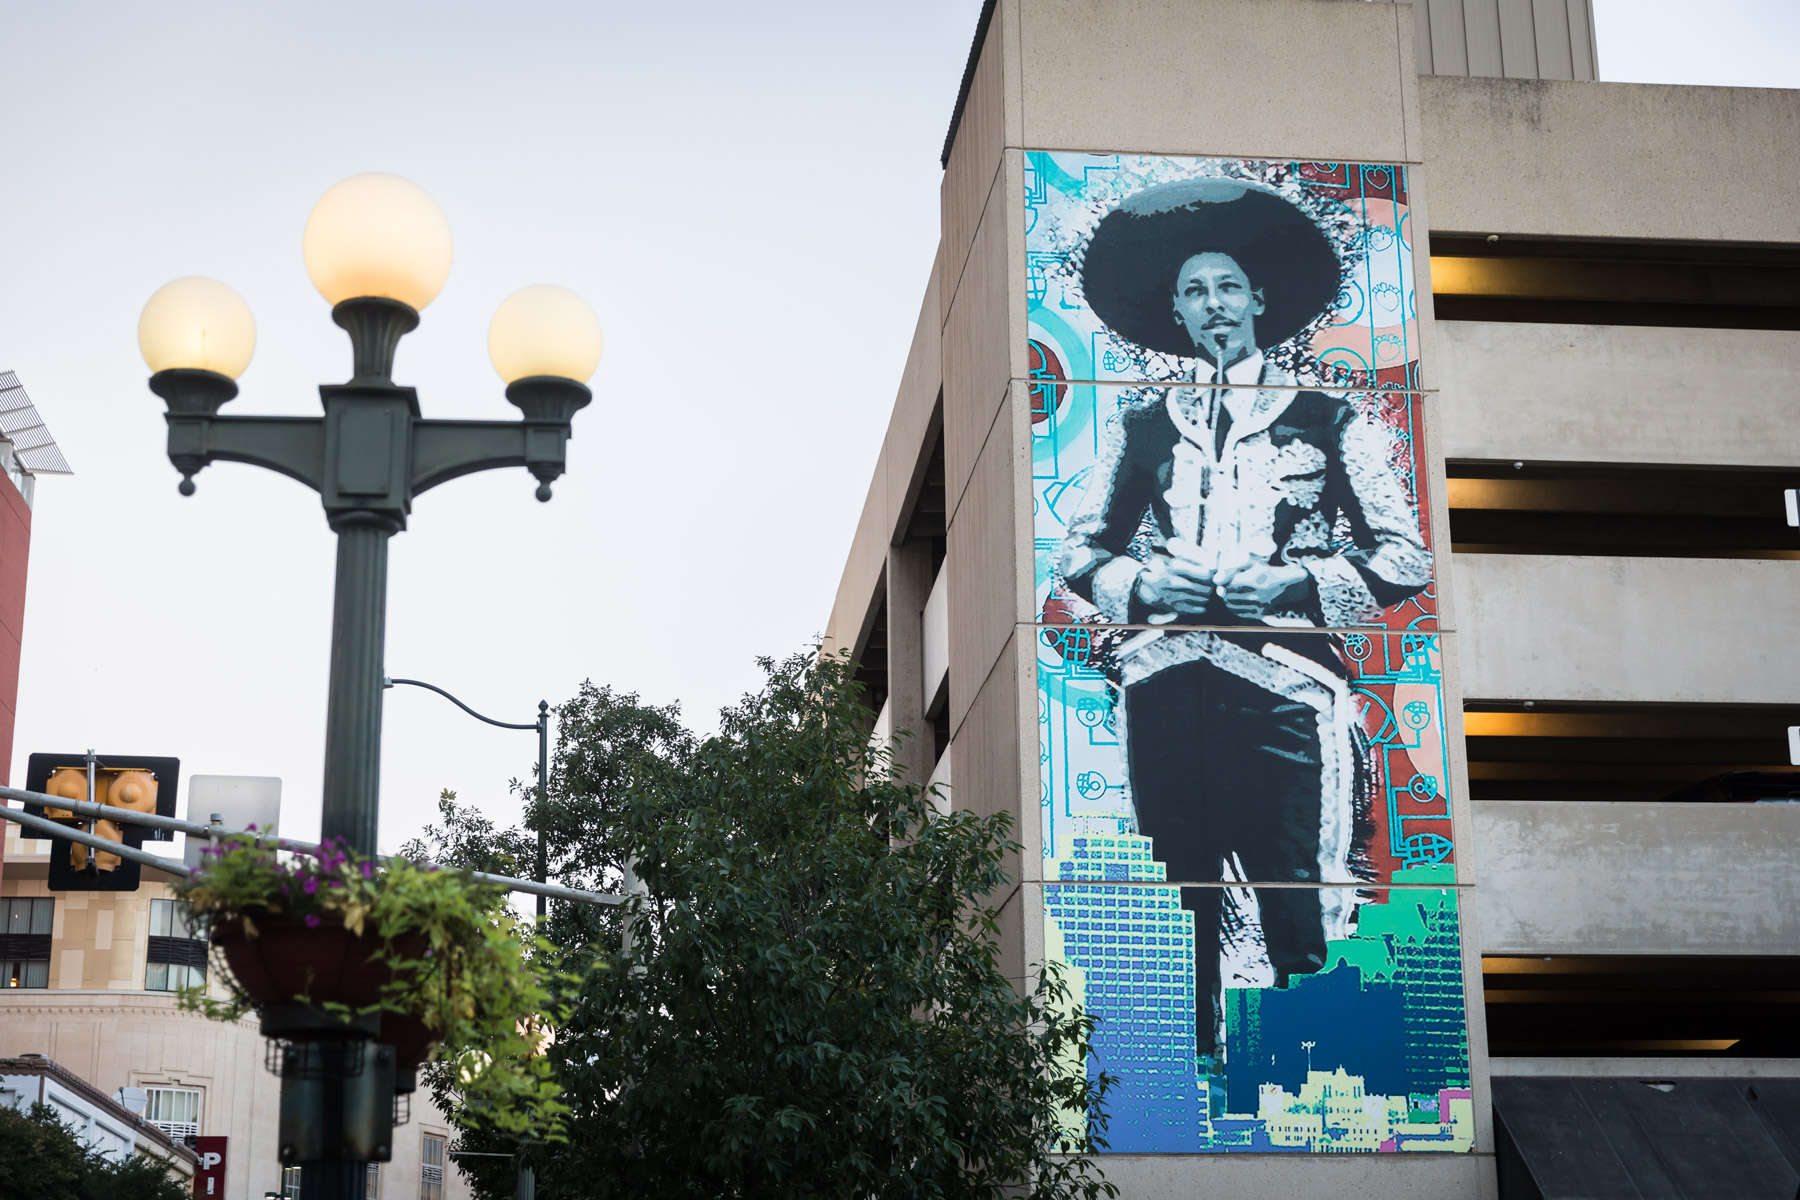 Public mural of mariachi wearing traditional clothing with lamp post in foreground for an article on the perfect downtown San Antonio family portrait itinerary